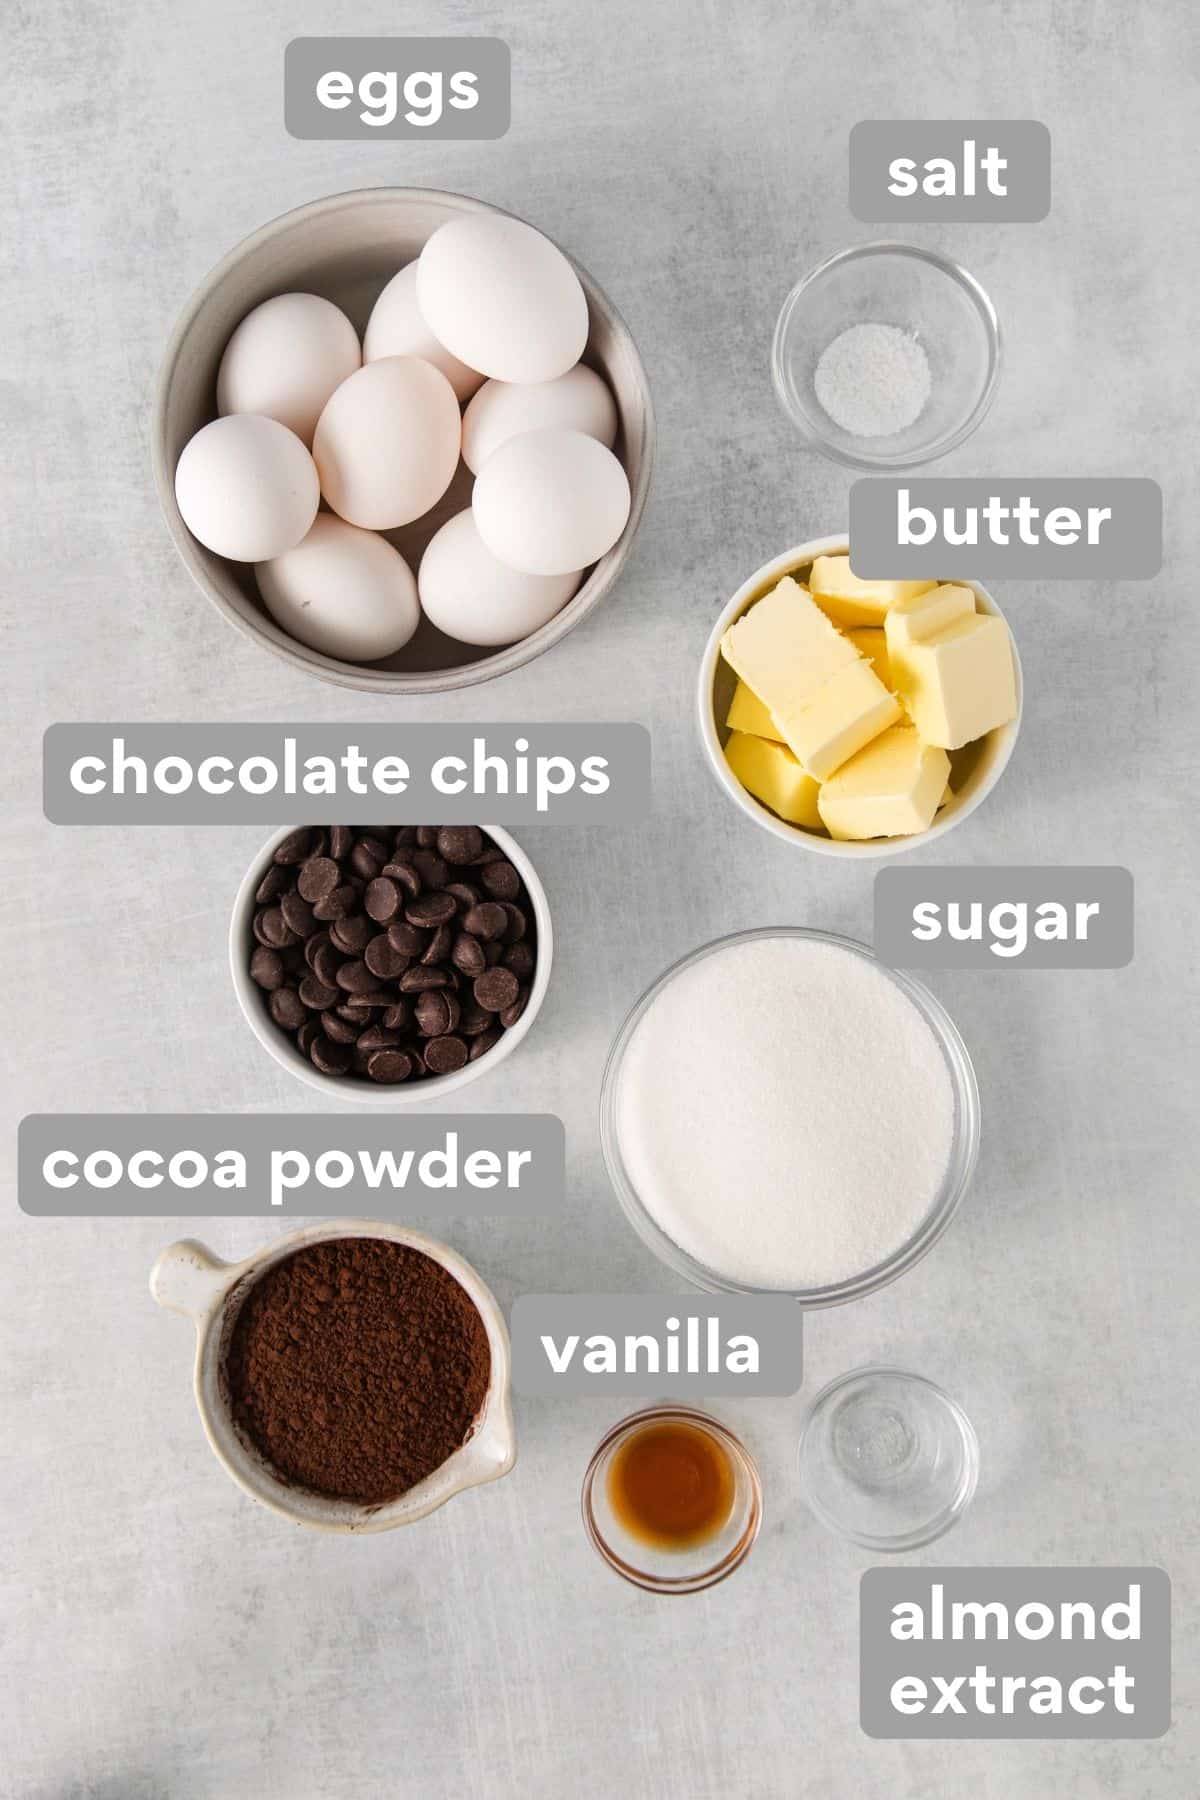 Flourless chocolate torte ingredients on a countertop